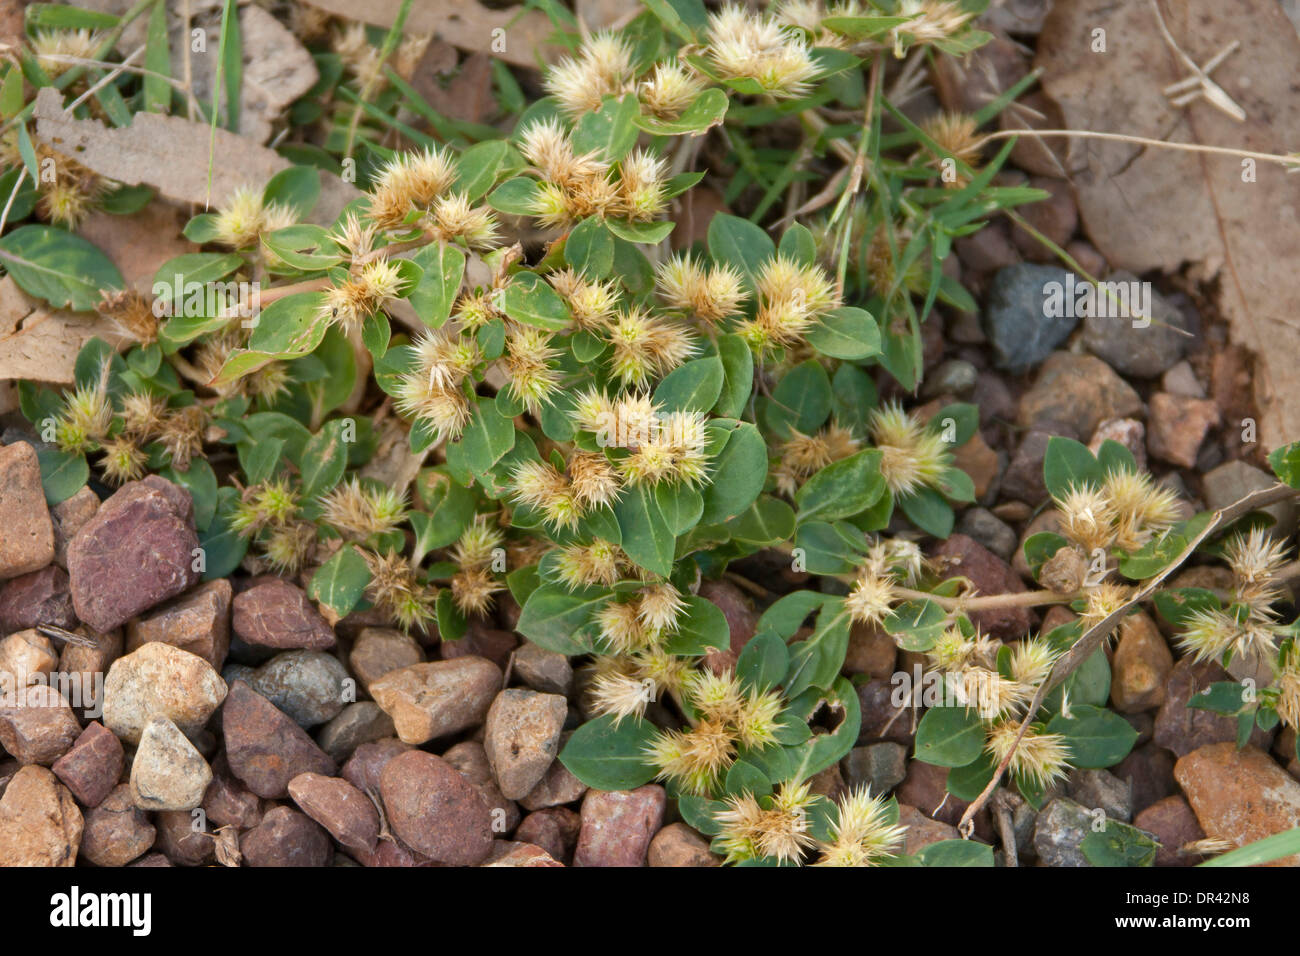 Clump of prickly weed species Bindii - Soliva pterosperma - showing seeds and leaves growing in Australian garden Stock Photo